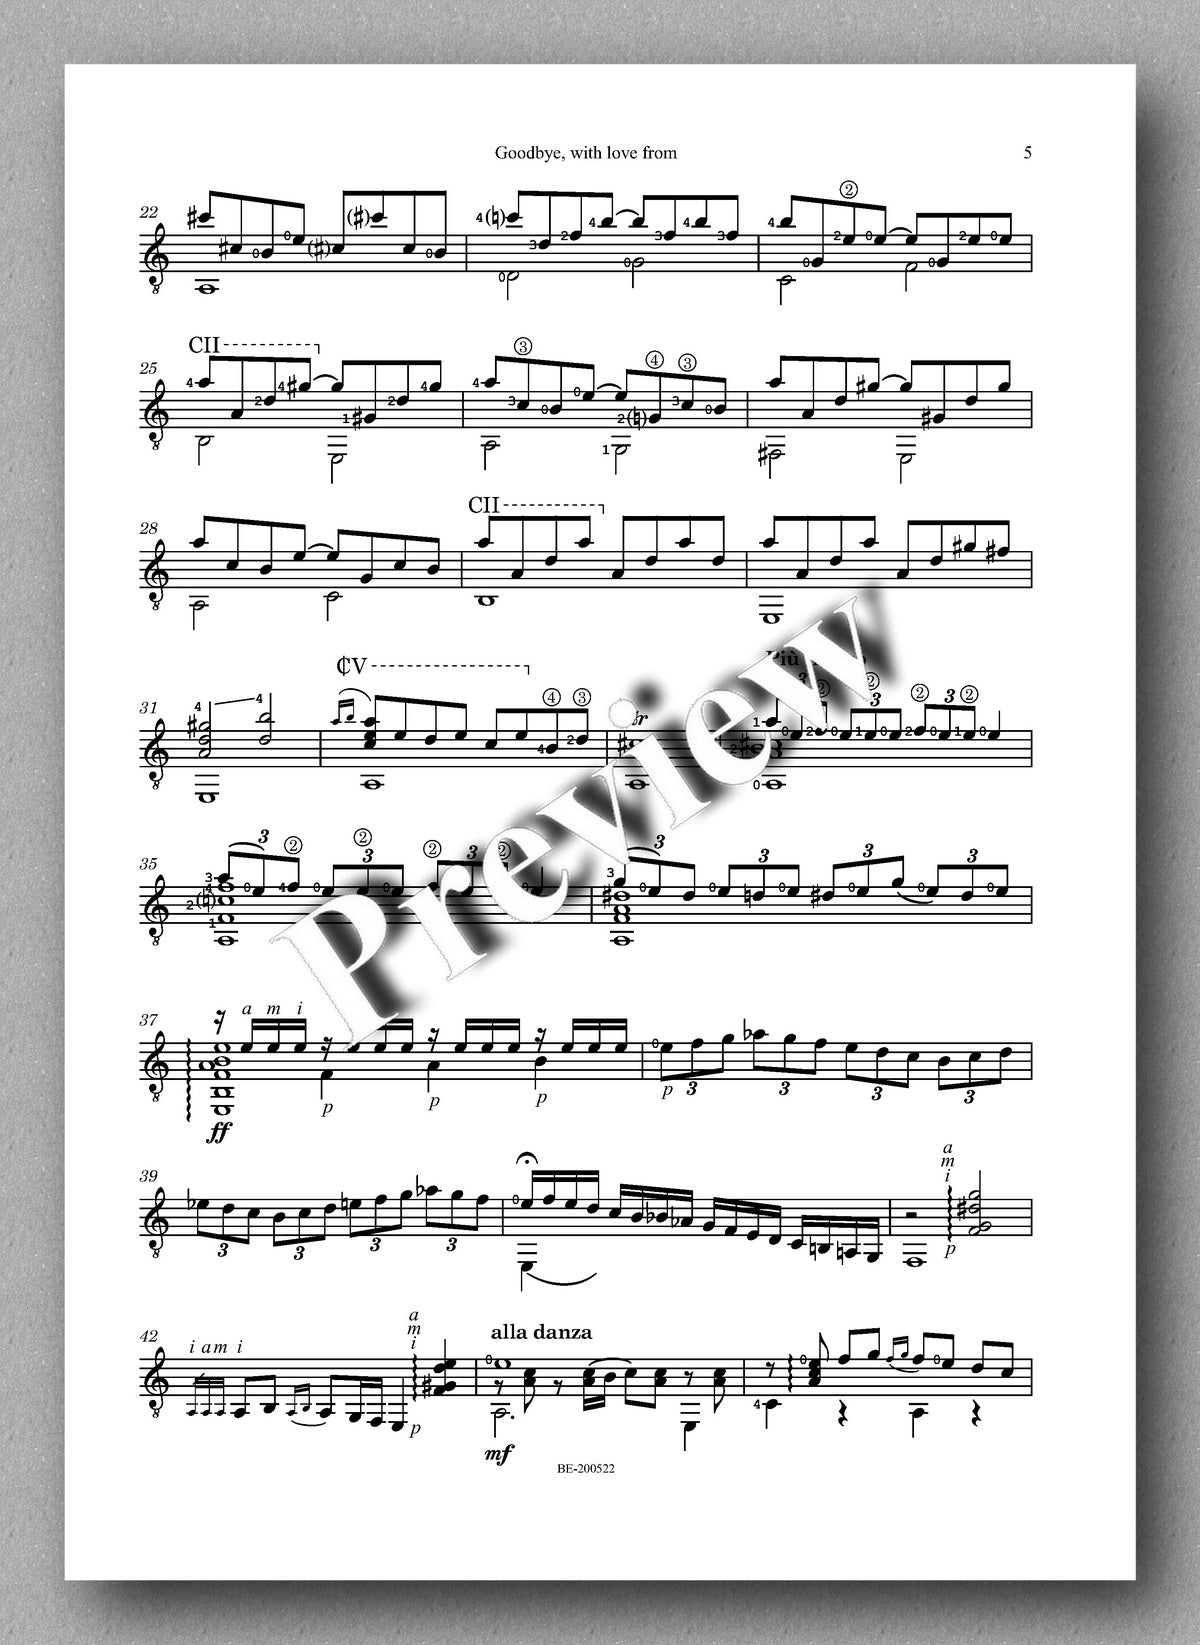 Kirill Voljanin, Goodbye, with love from - preview of the music score 2